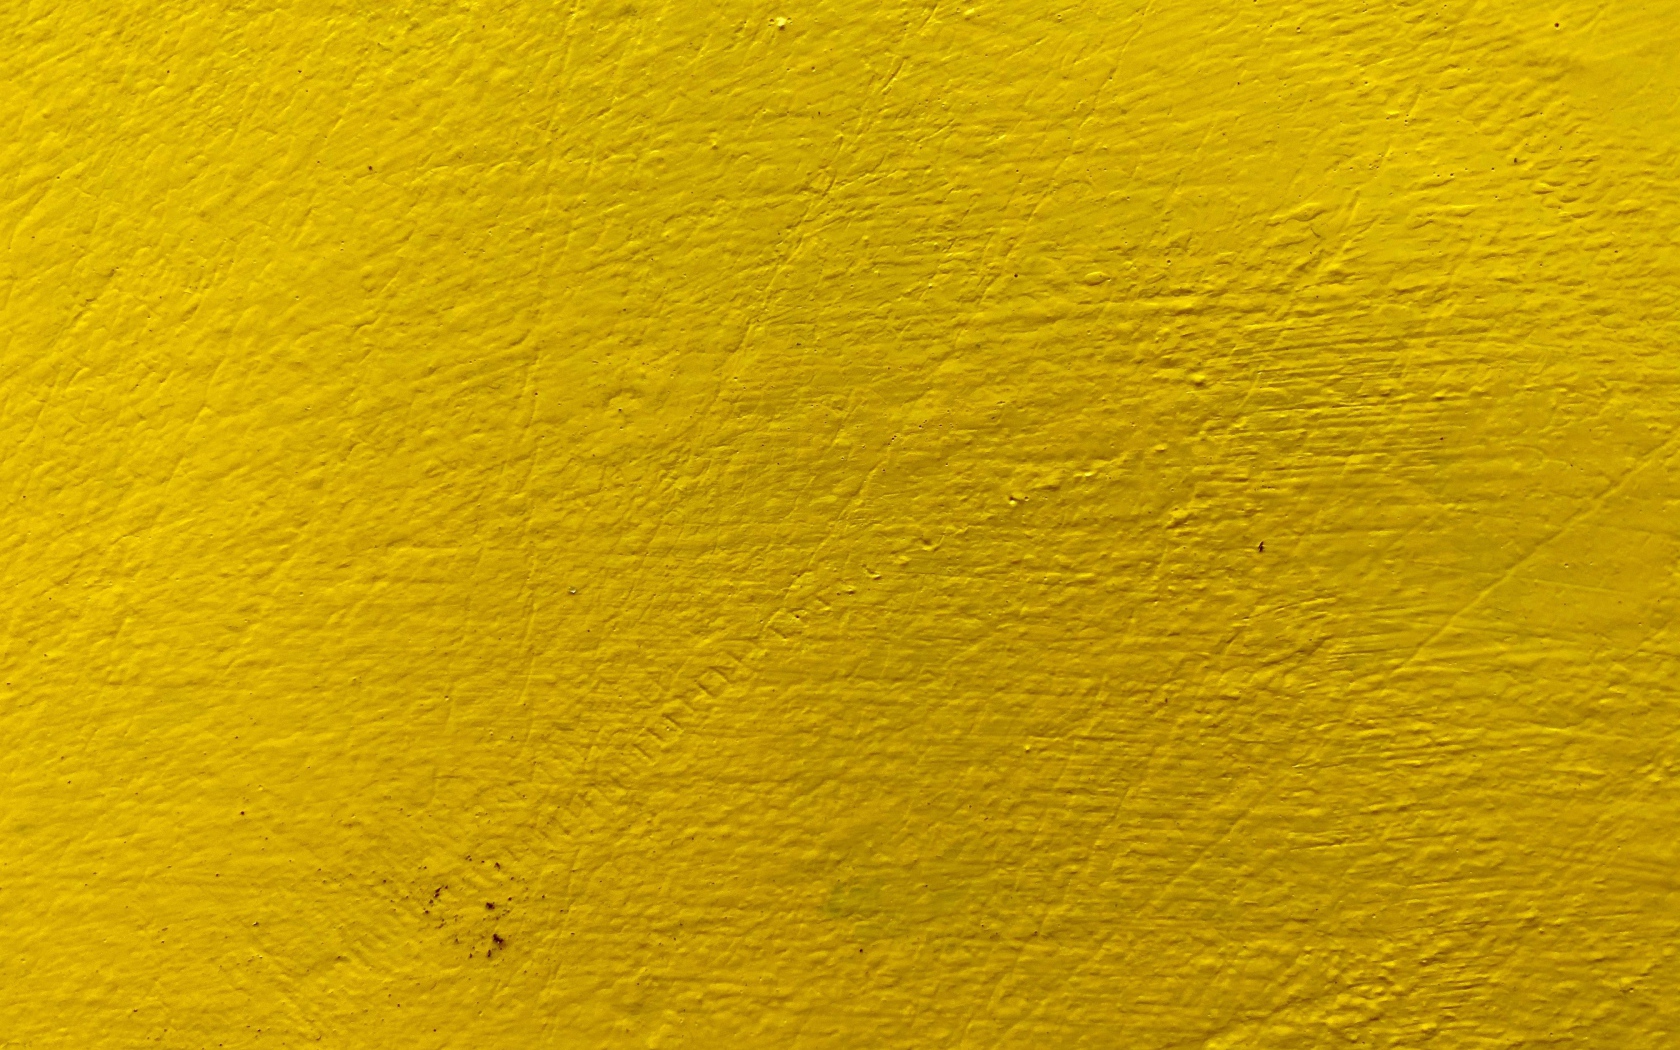 The wall is painted yellow, background